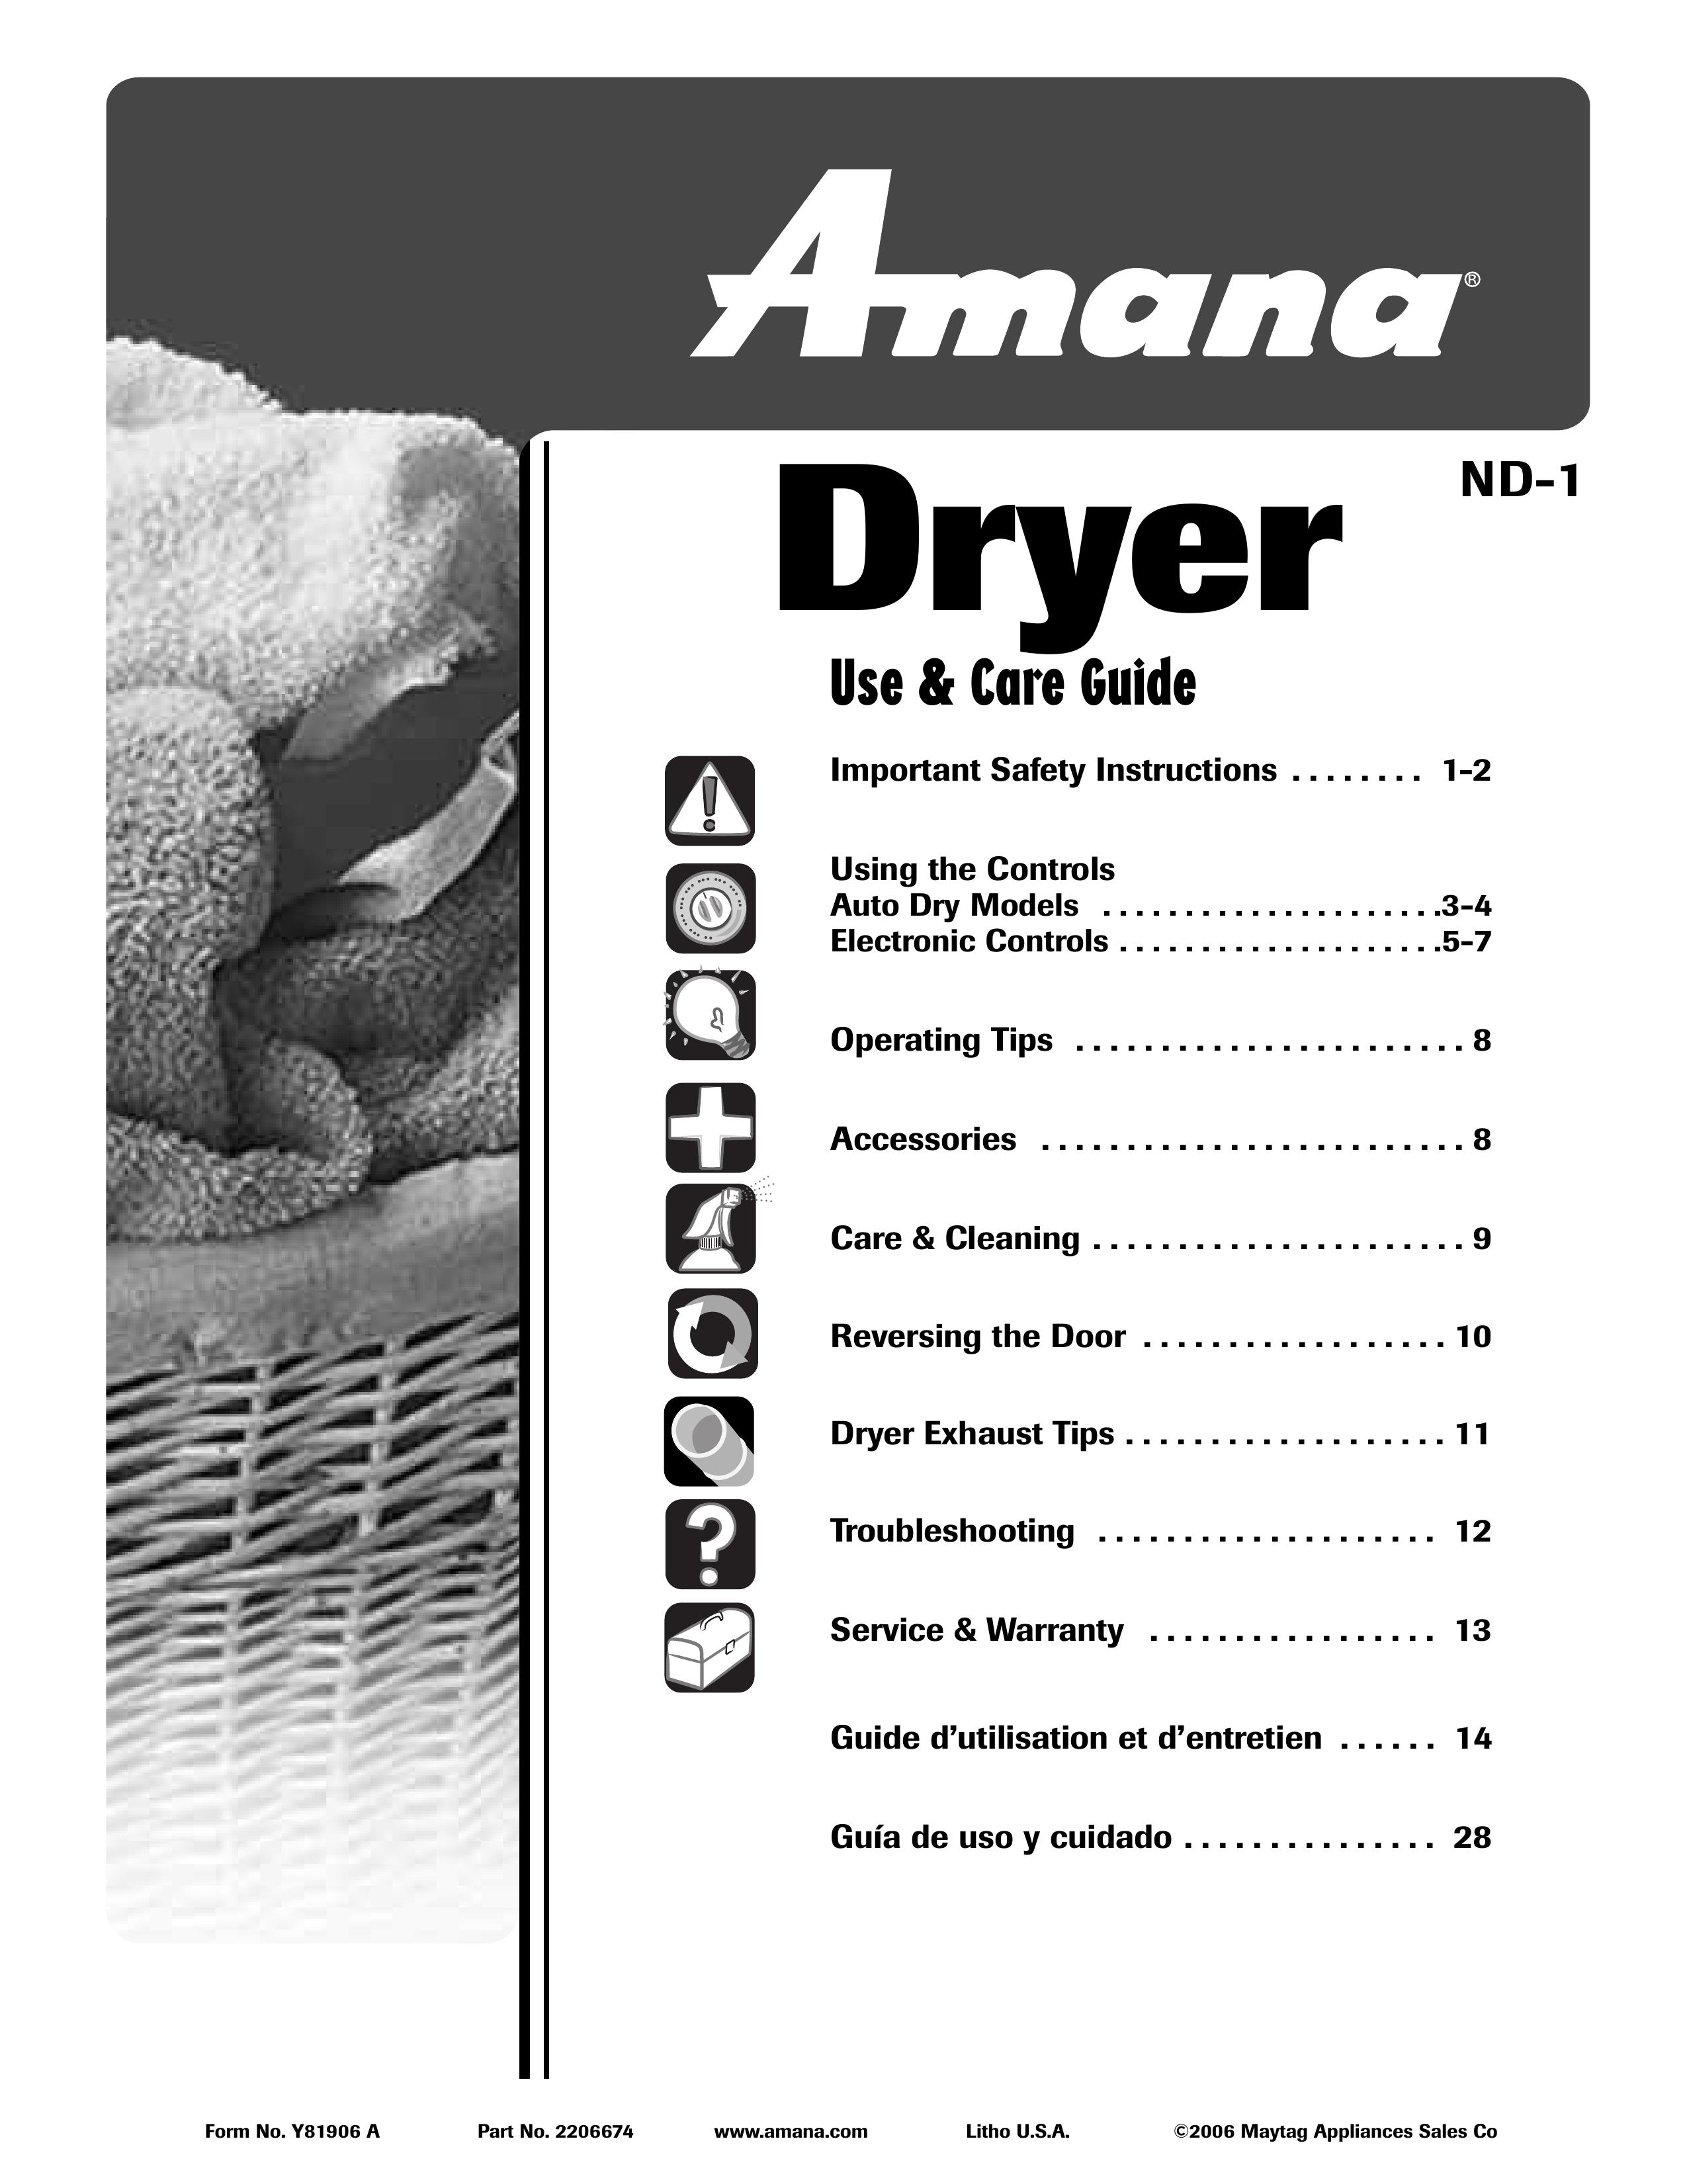 Amana ND-1 Clothes Dryer User Manual